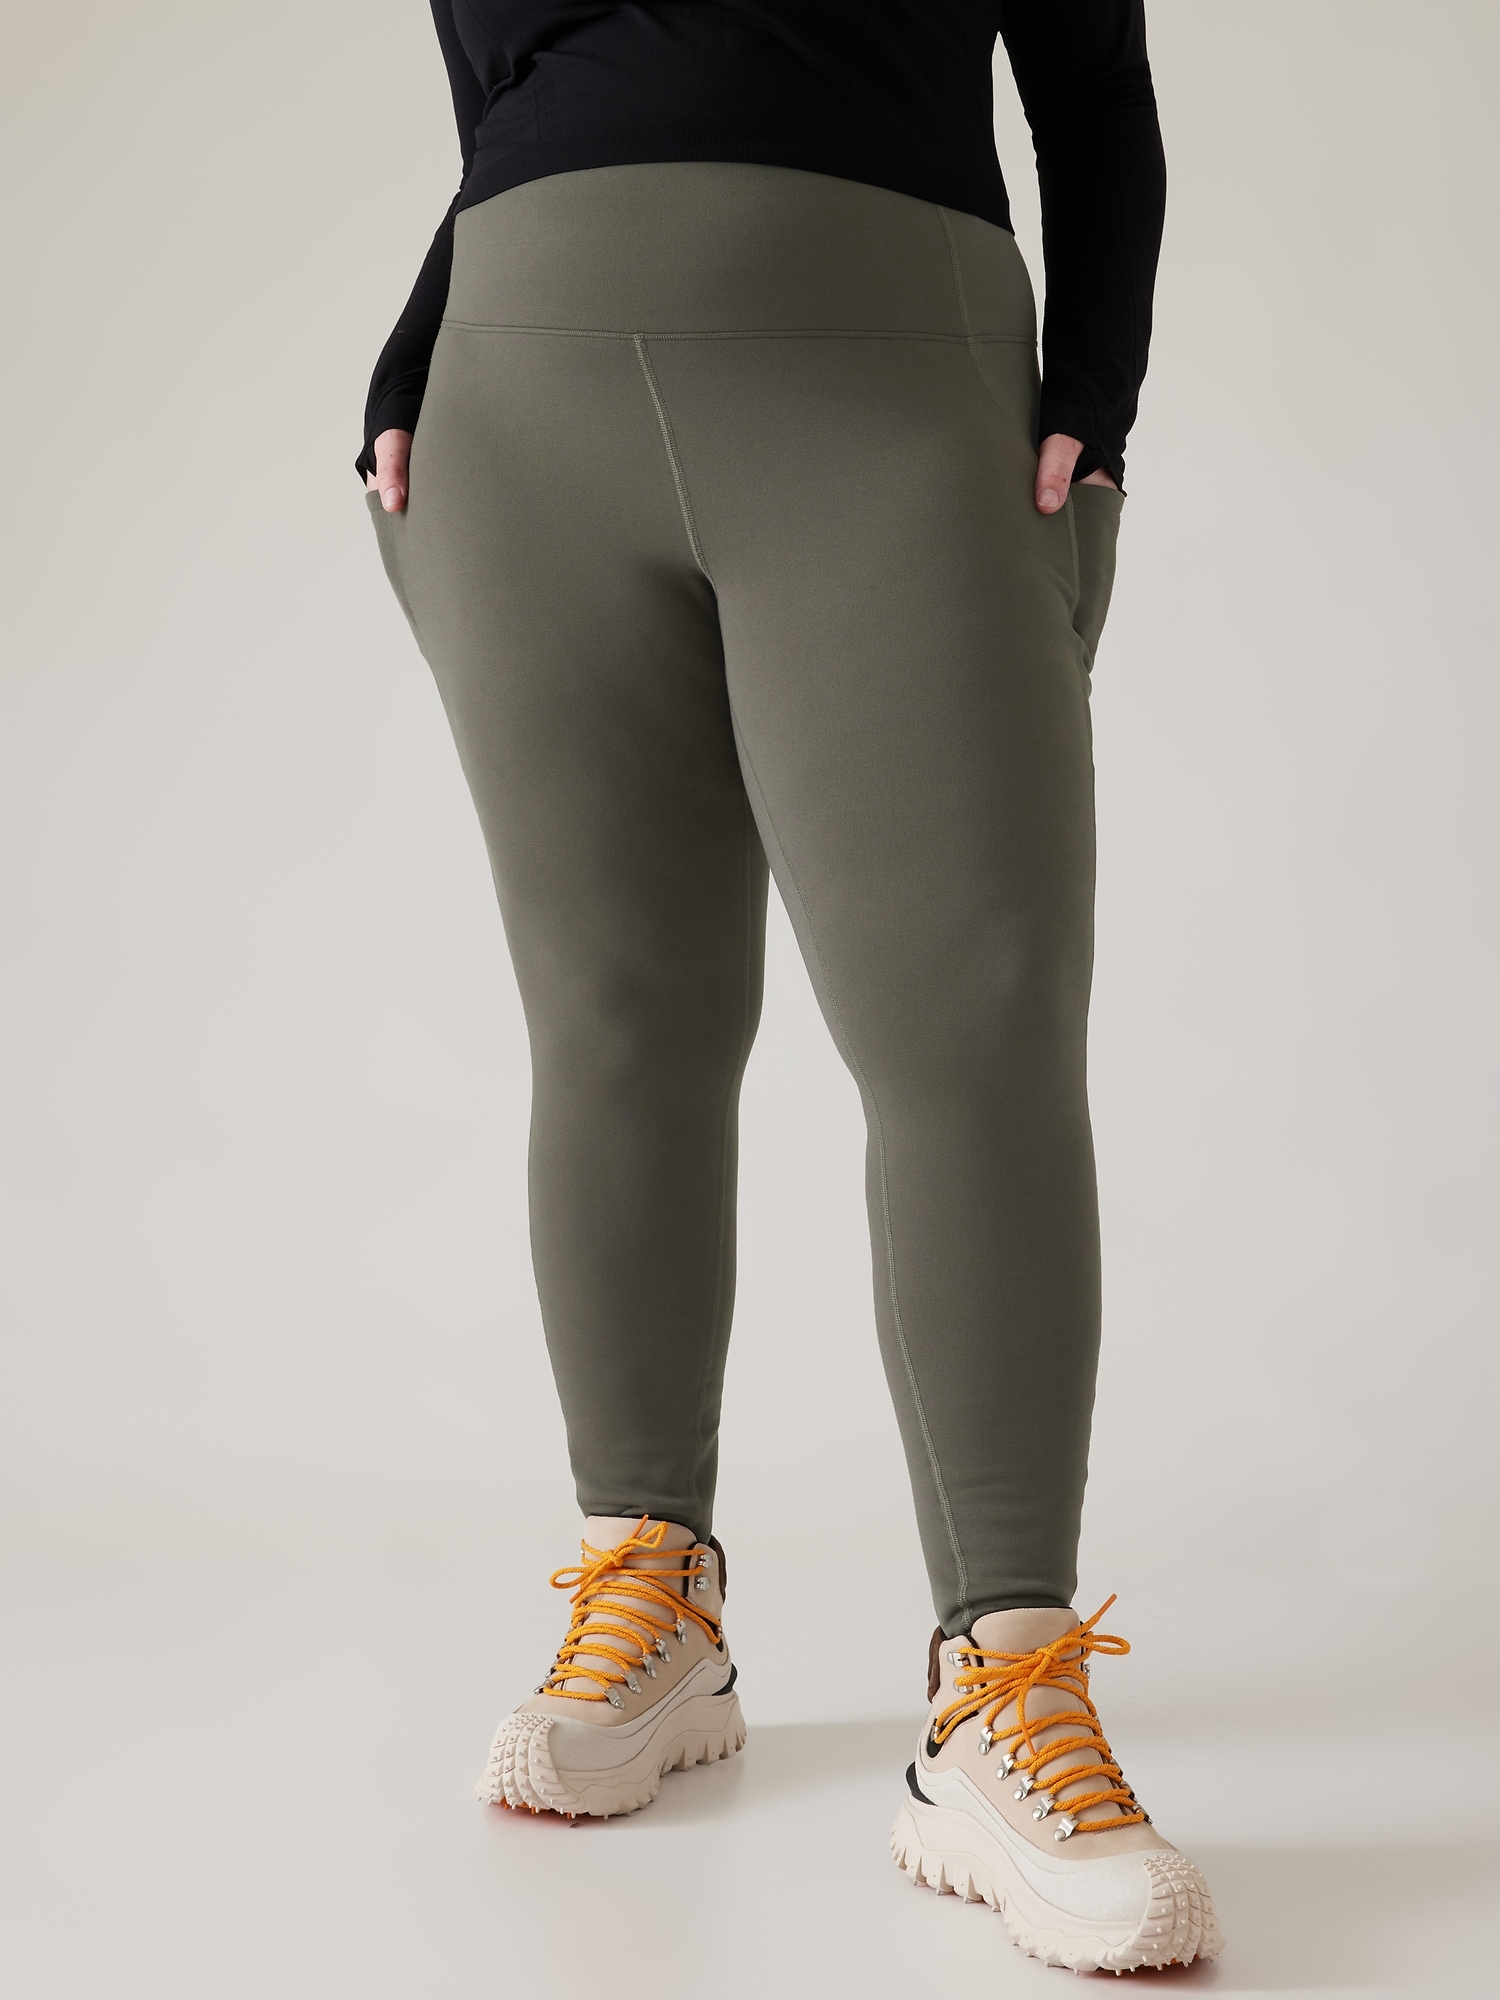 Athleta Altitude Tight, 23 Chic Thermal Leggings That Will Warm Your Legs  All Winter